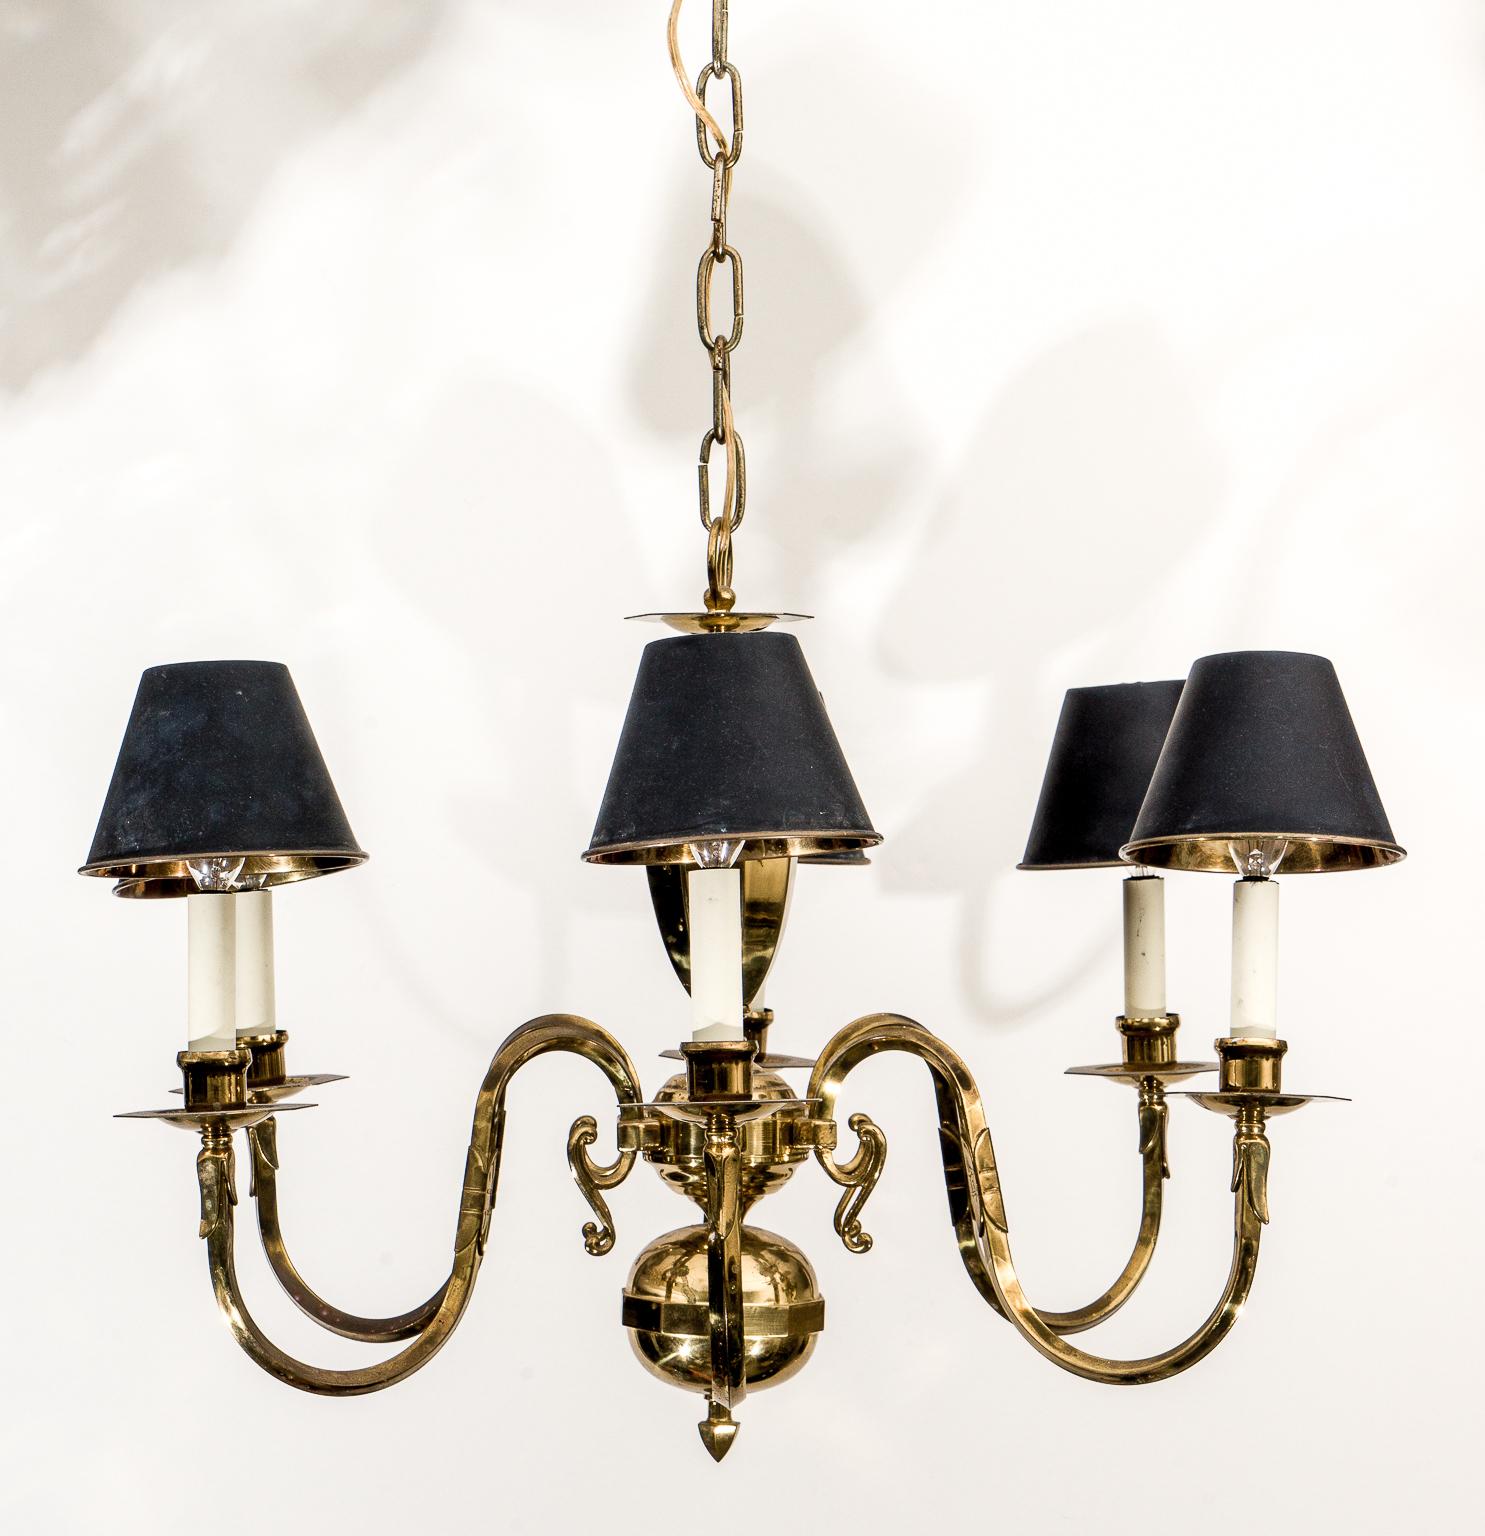 Elegant Sheraton style chandelier 6-light brass and black shades Hollywood Regency - midcentury vintage- from a Palm Beach estate

Requires 6 chandelier based bulbs - not included.

Height including chain is 43